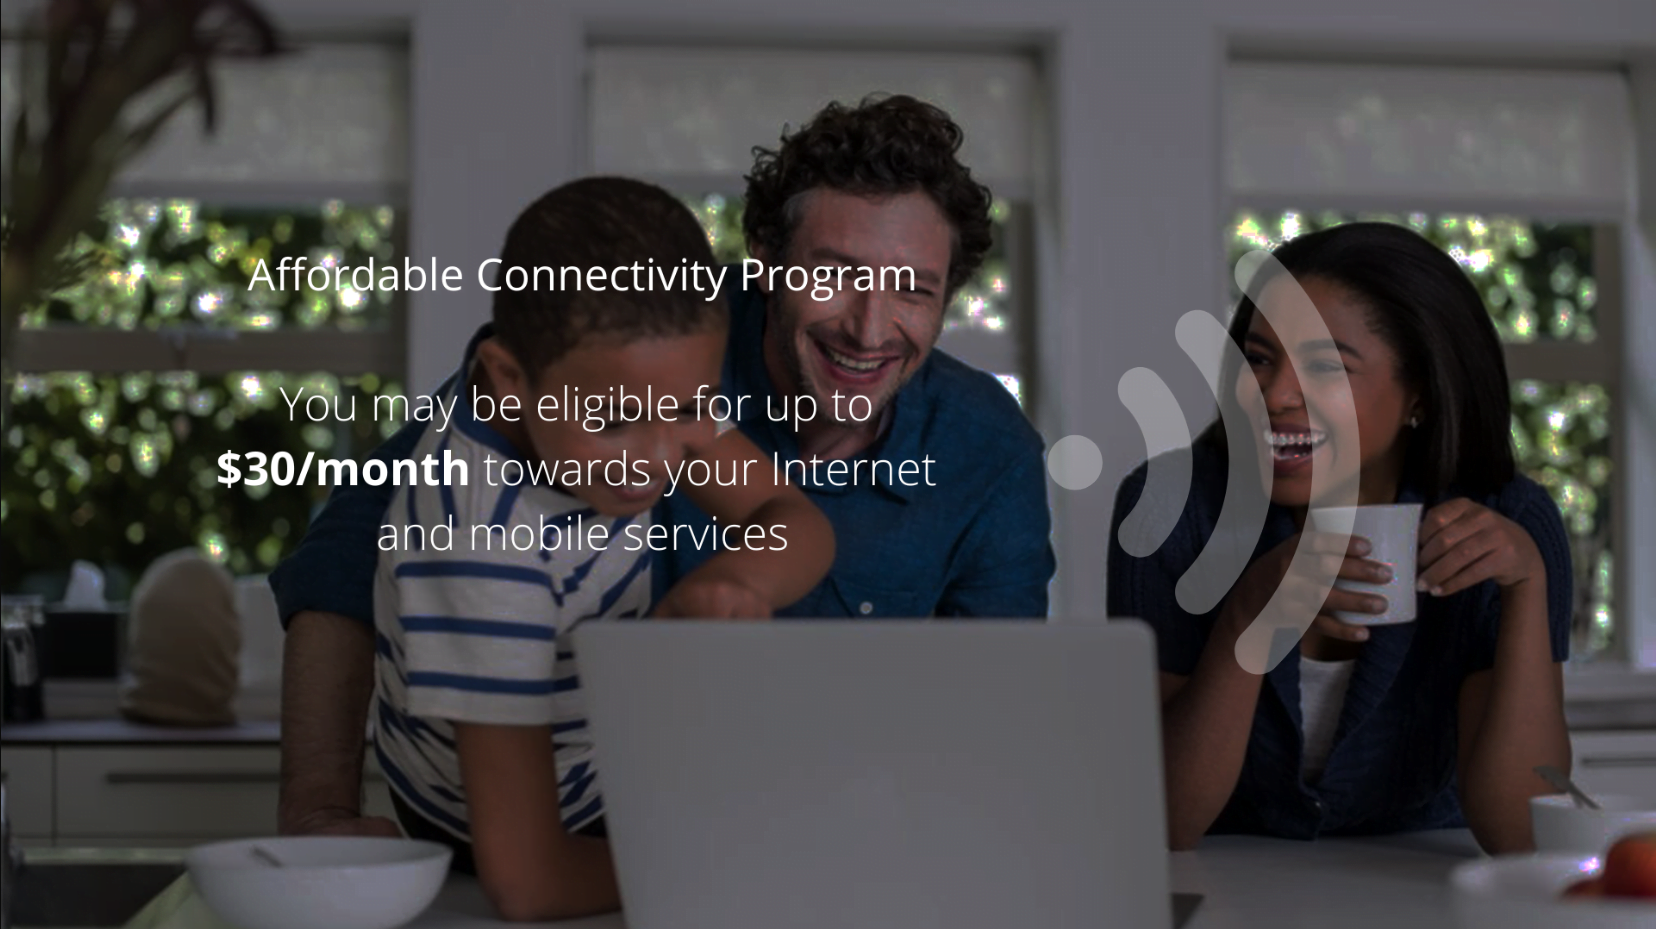 Image: Discover affordable connectivity options at Cathect Communication. Get reliable high-speed internet and a free tablet through our program.